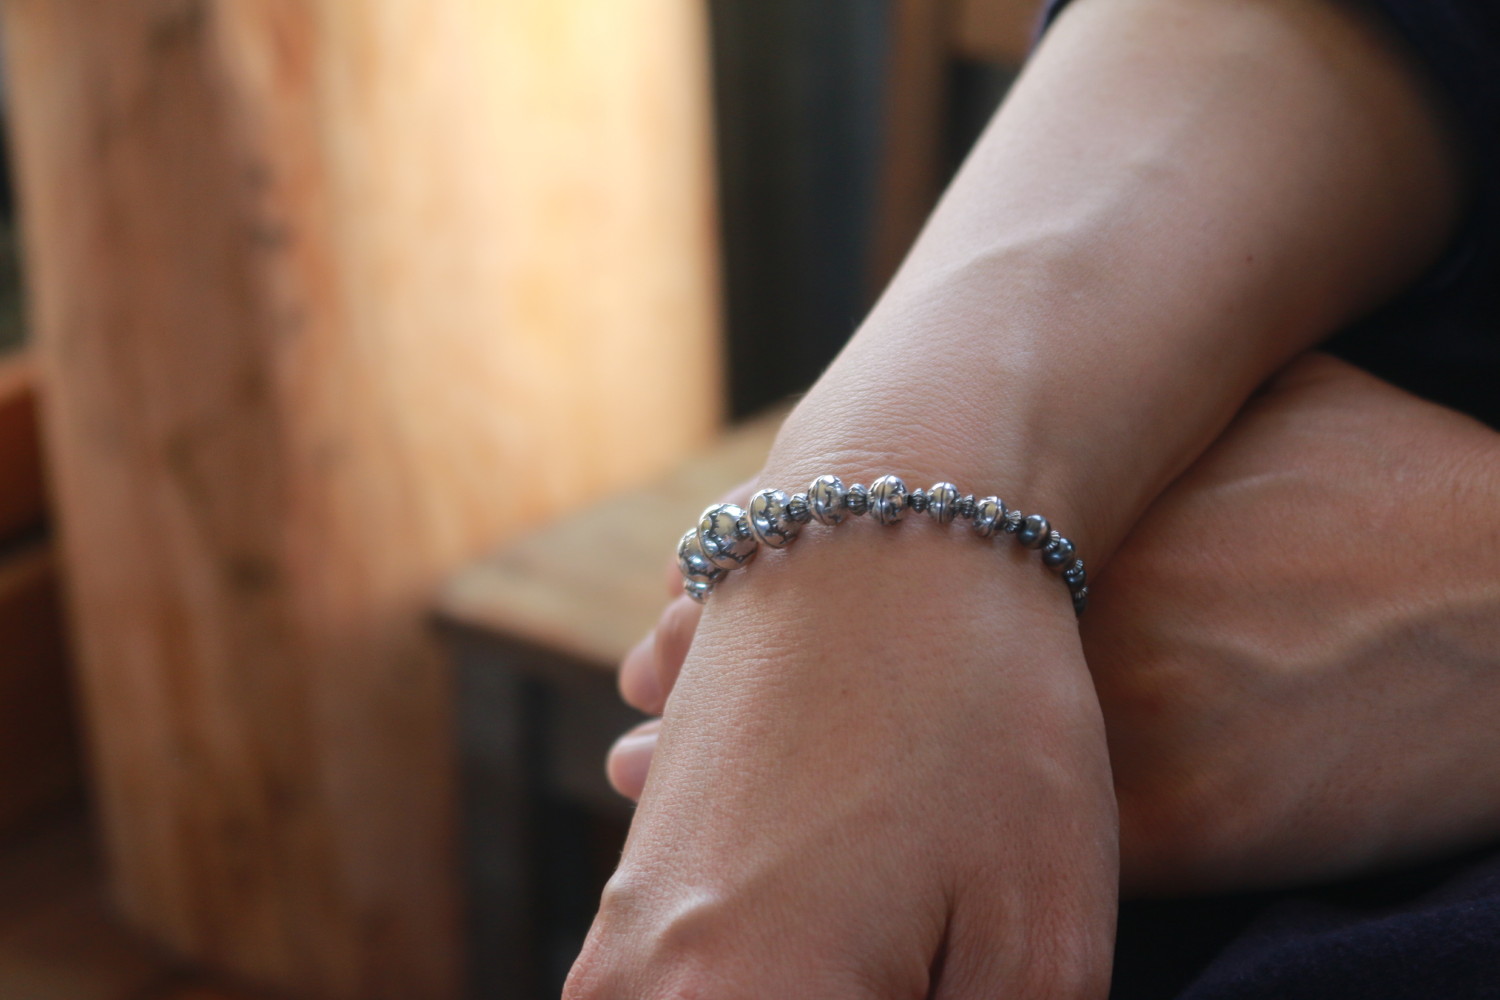 Stampworks , Silver Beads Bracelet　着用例、モデルは女性。